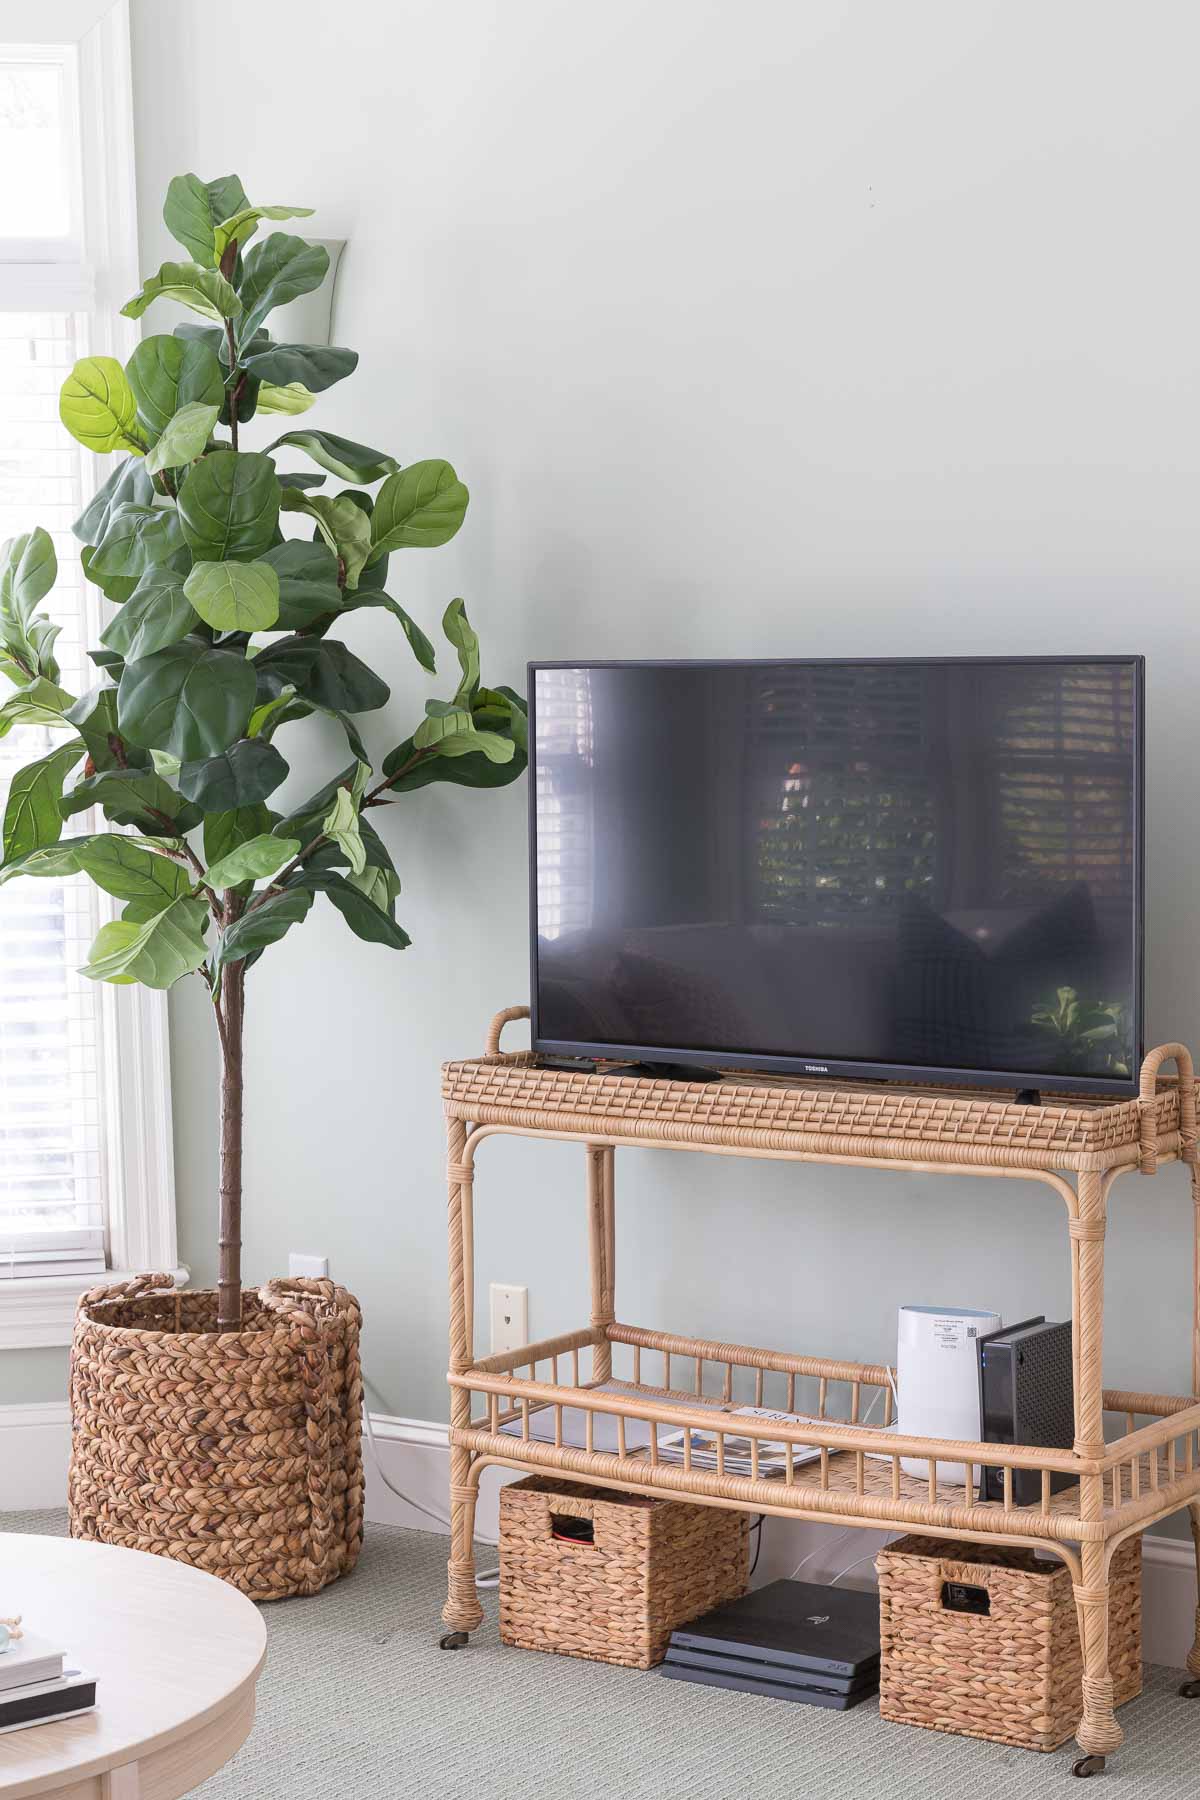 Rattan bar cart used as a TV stand